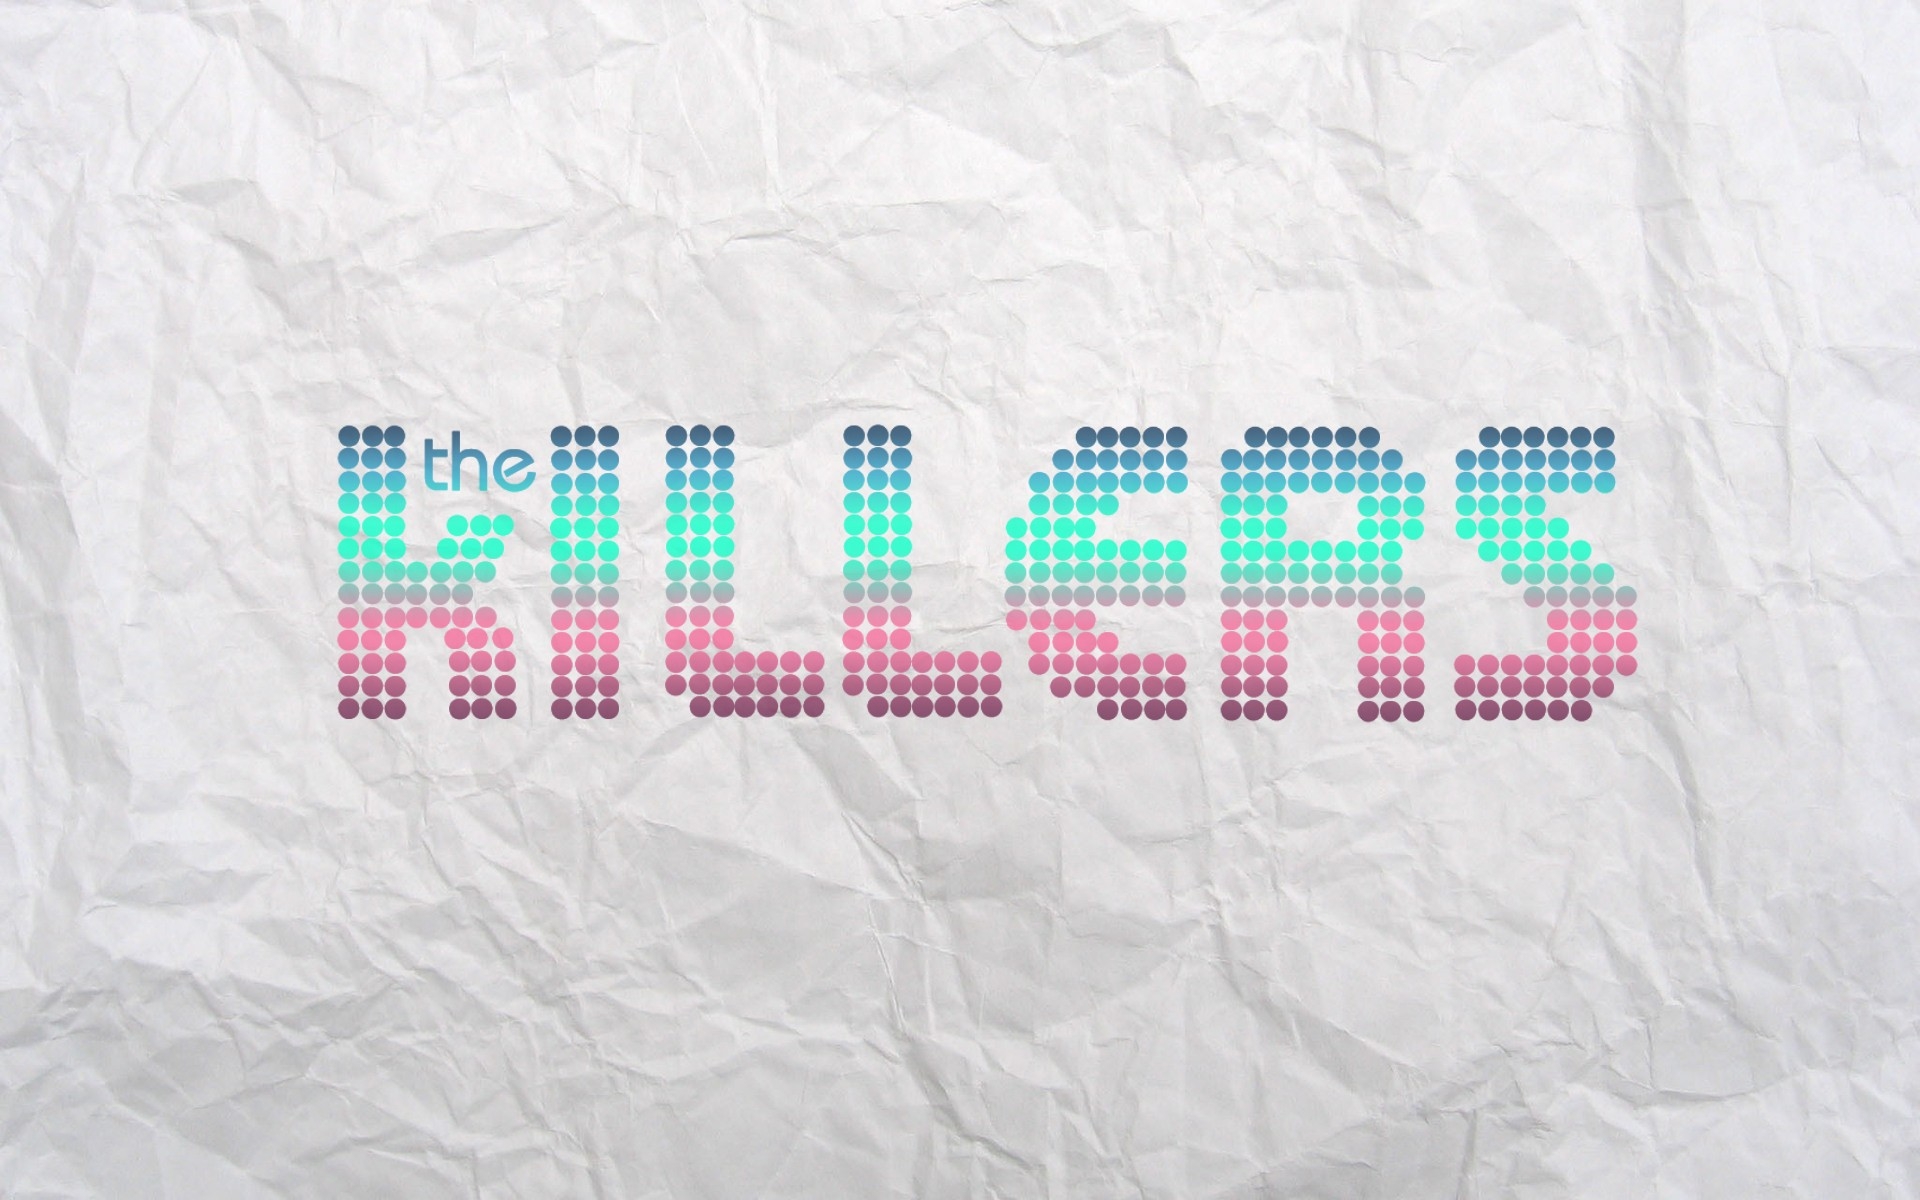 6 The Killers HD Wallpapers | Backgrounds - Wallpaper Abyss